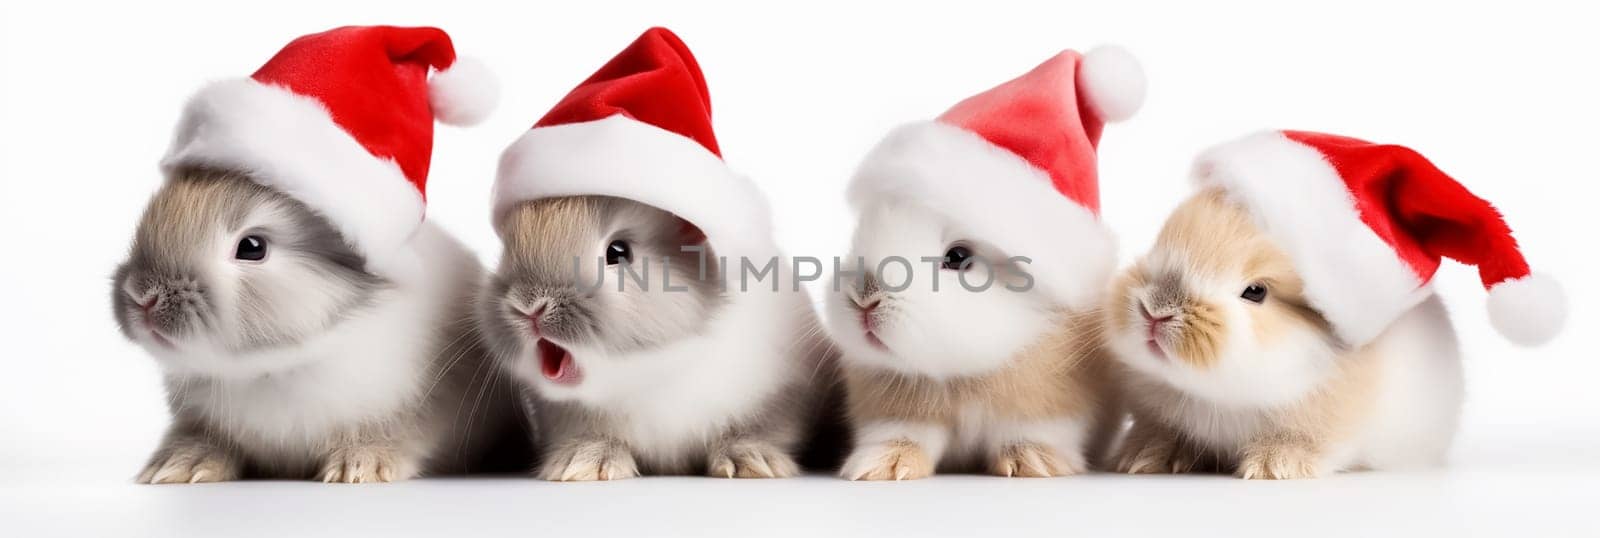 Four funny little rabbits in Christmas hats. Christmas or new year concept with rabbits in red Santa Claus hats